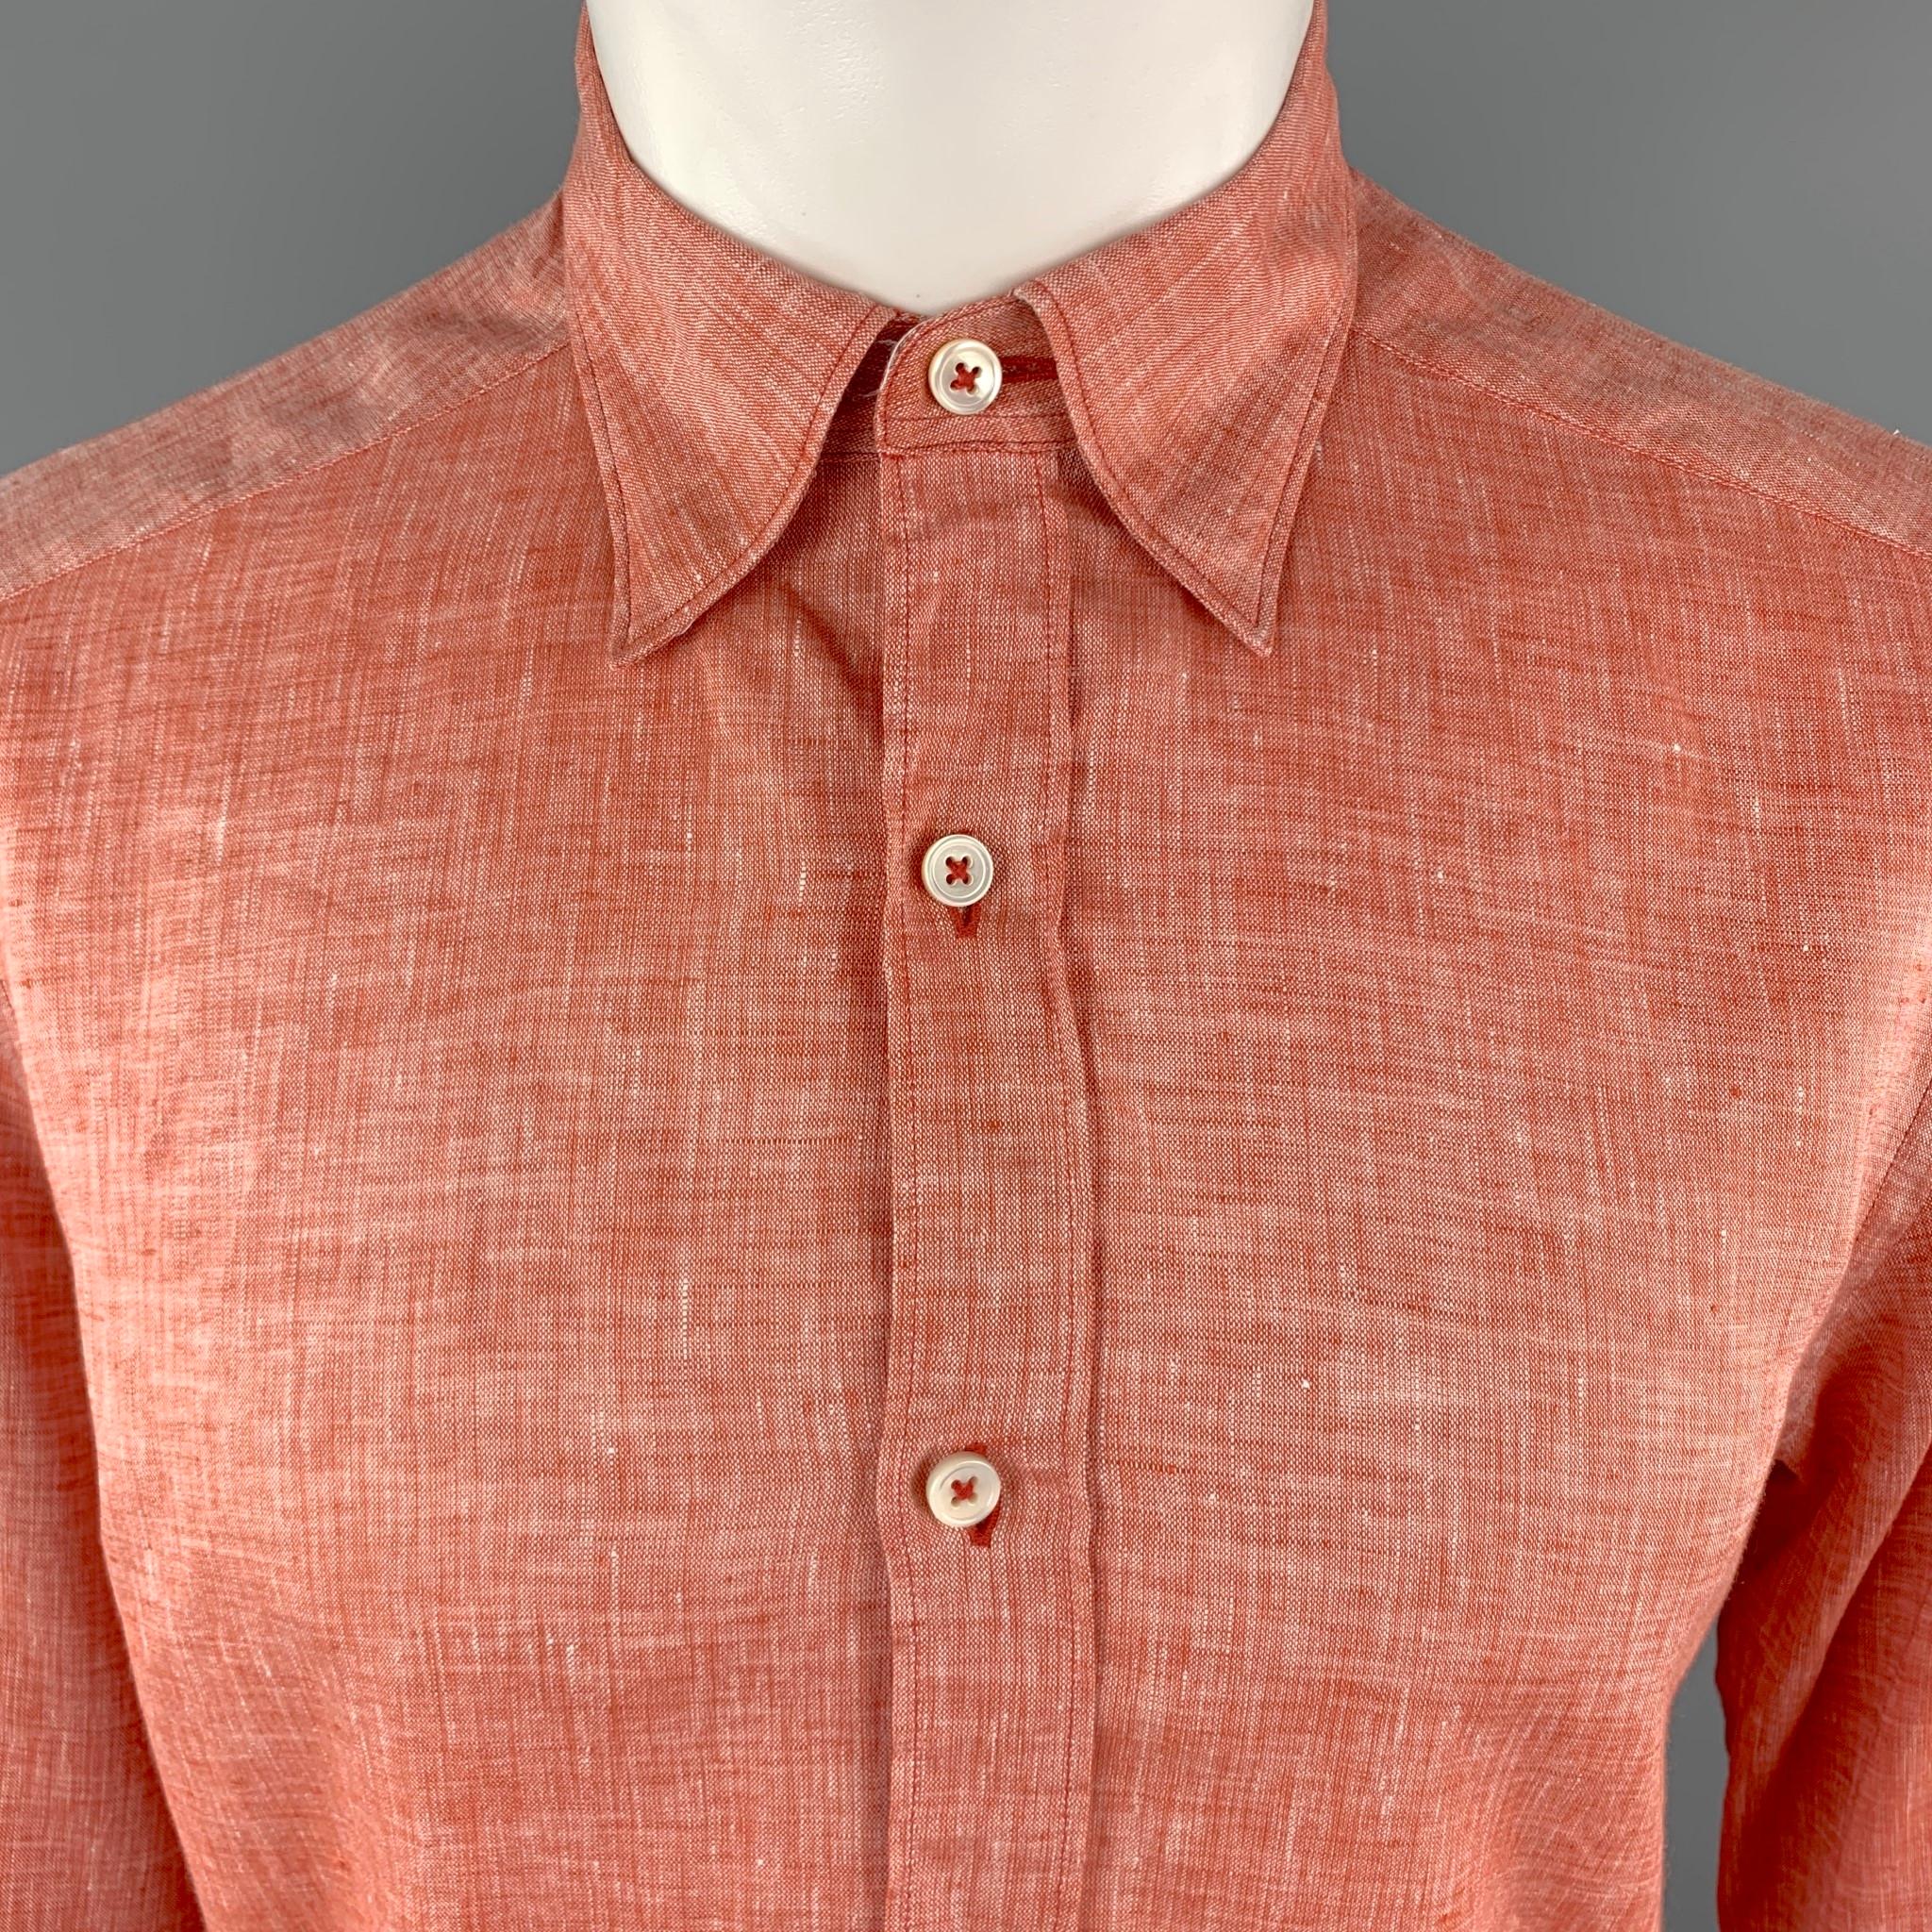 ERMENEGILDO ZEGNA Long Sleeve Shirt comes in an orange tone in a solid linen material, with a spread collar, buttoned cuffs, button down. 

Excellent Pre-Owned Condition.
Marked: S

Measurements:

Shoulder: 16.5 in. 
Chest: 40 in. 
Sleeve: 25.5 in.